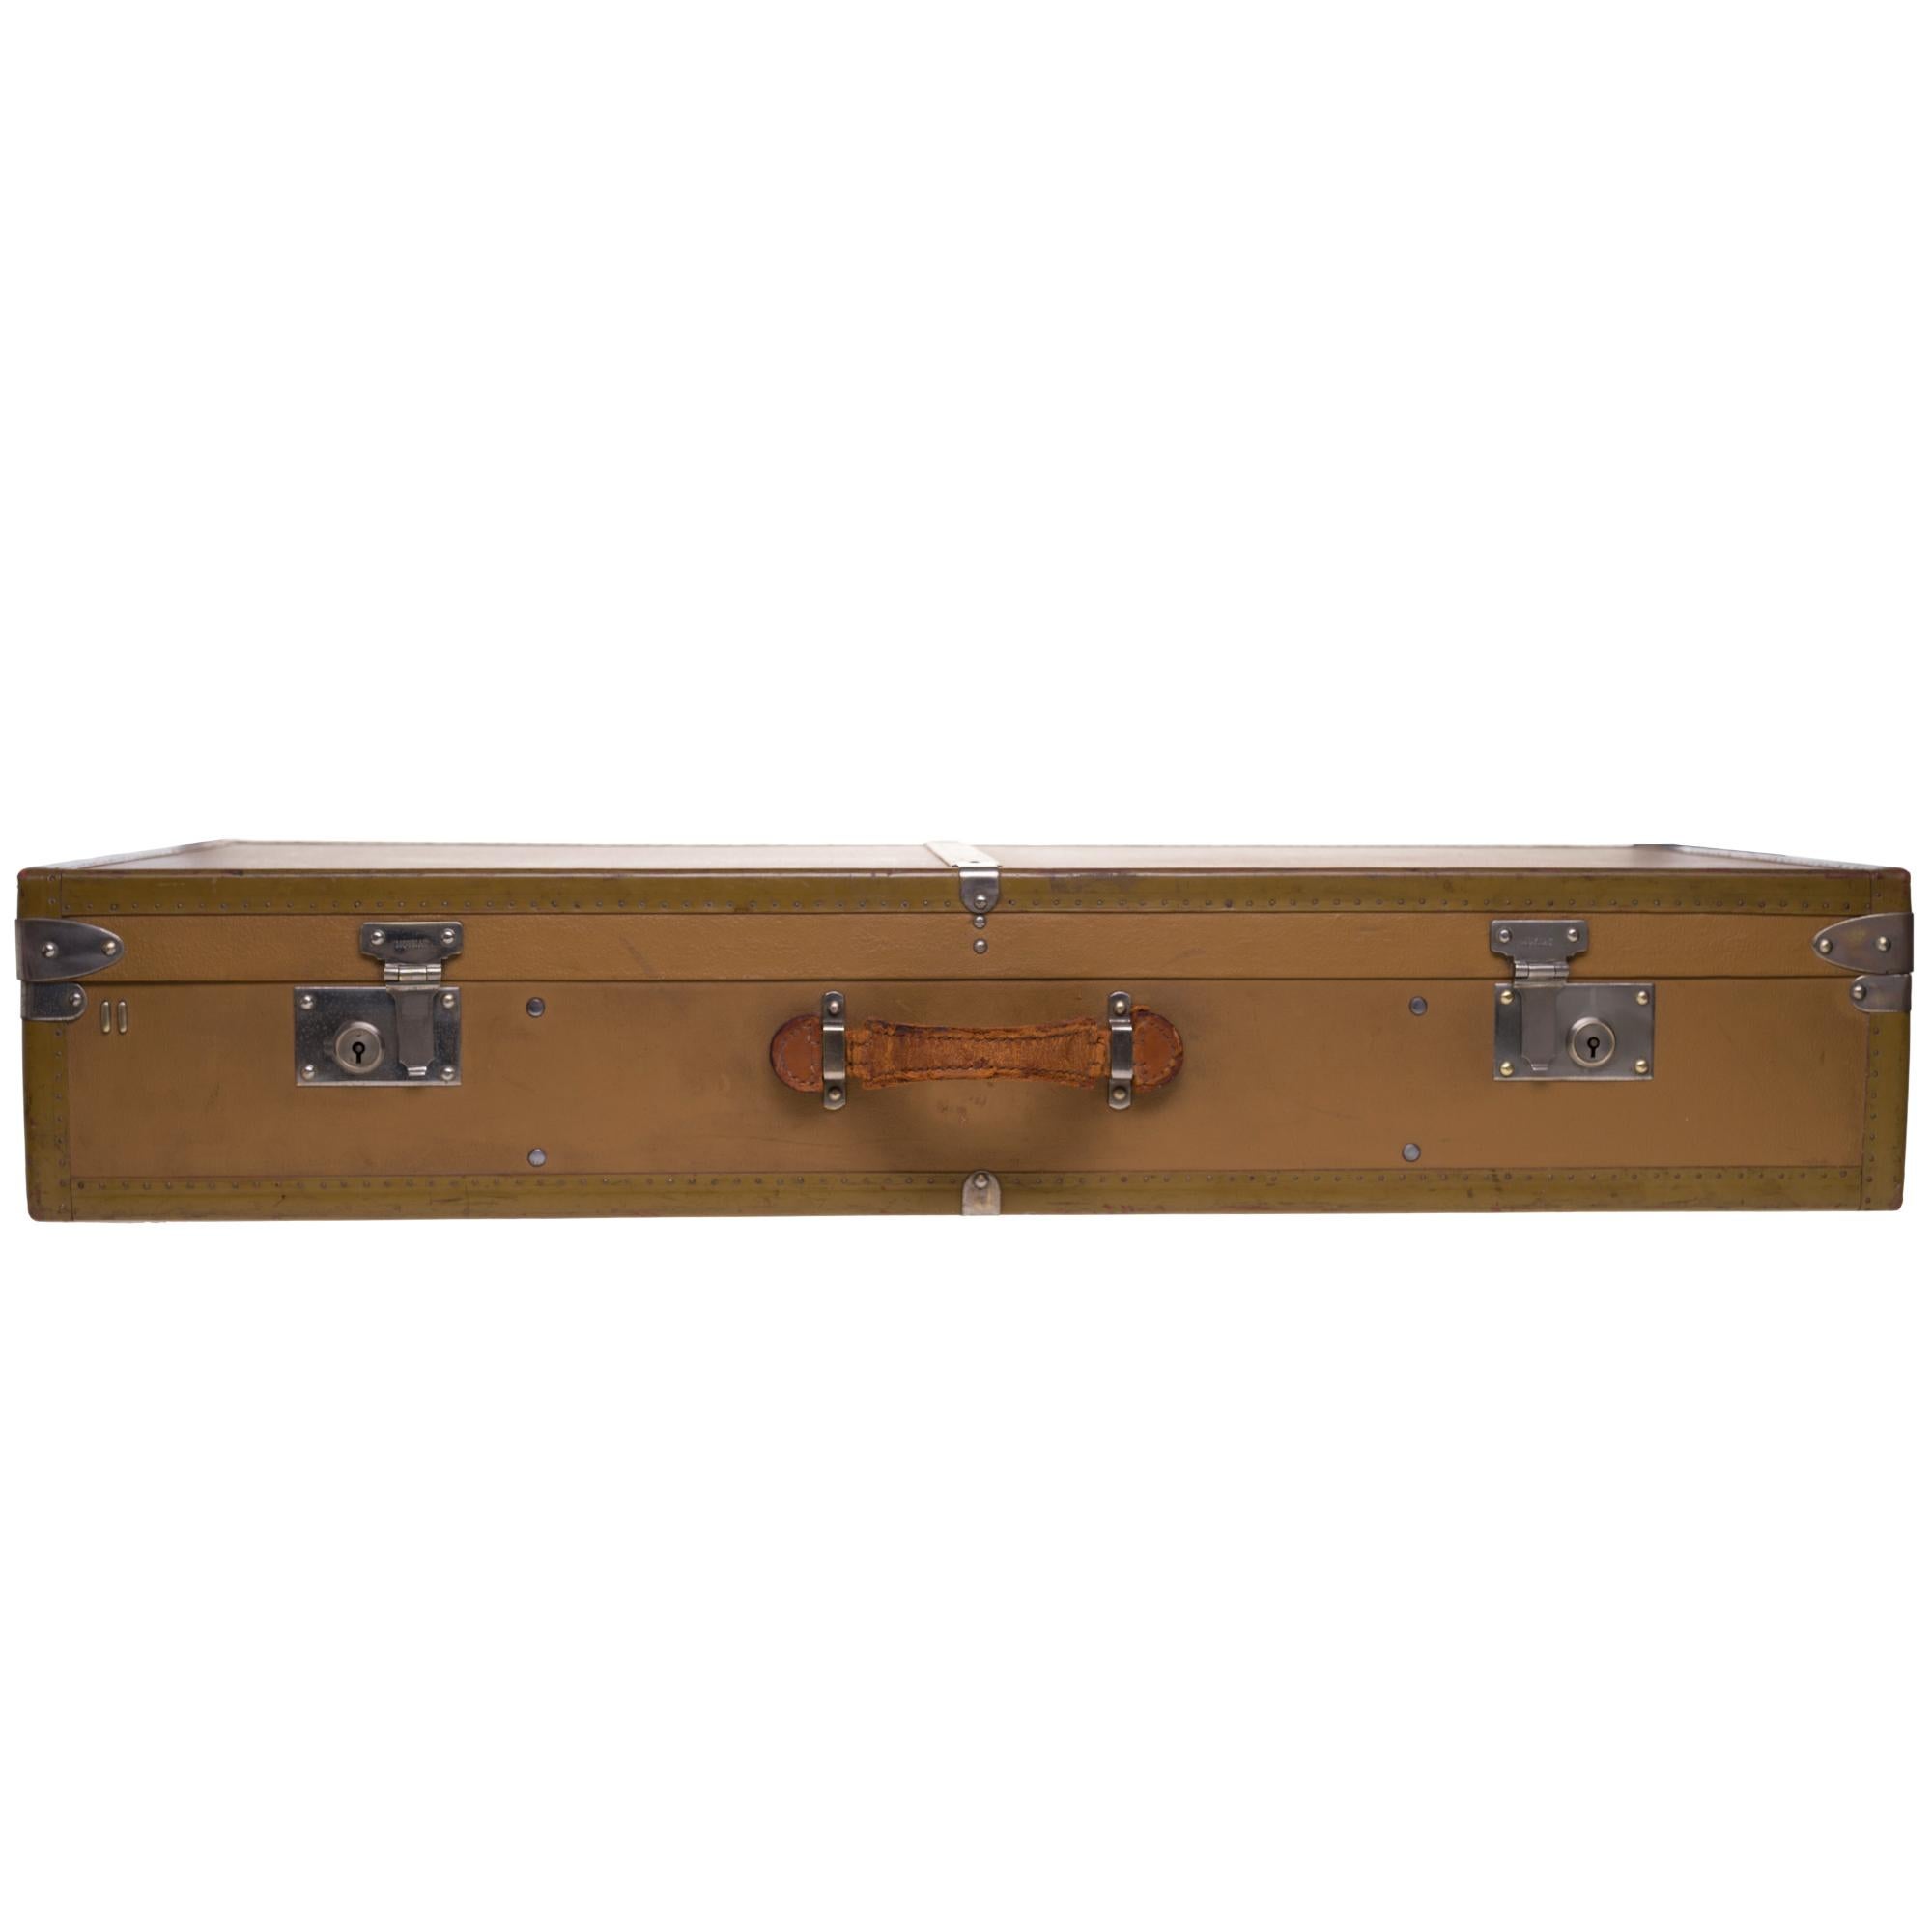 Beautiful decorative and collectible object: MOYNAT suitcase in coated canvas.
Metal hardware .
Leather handle.
Original label.
Circa 1930.
Dimensions: 77 * 166 * 36 cm.

Good vintage condition despite interior and exterior usage marks on canvas and